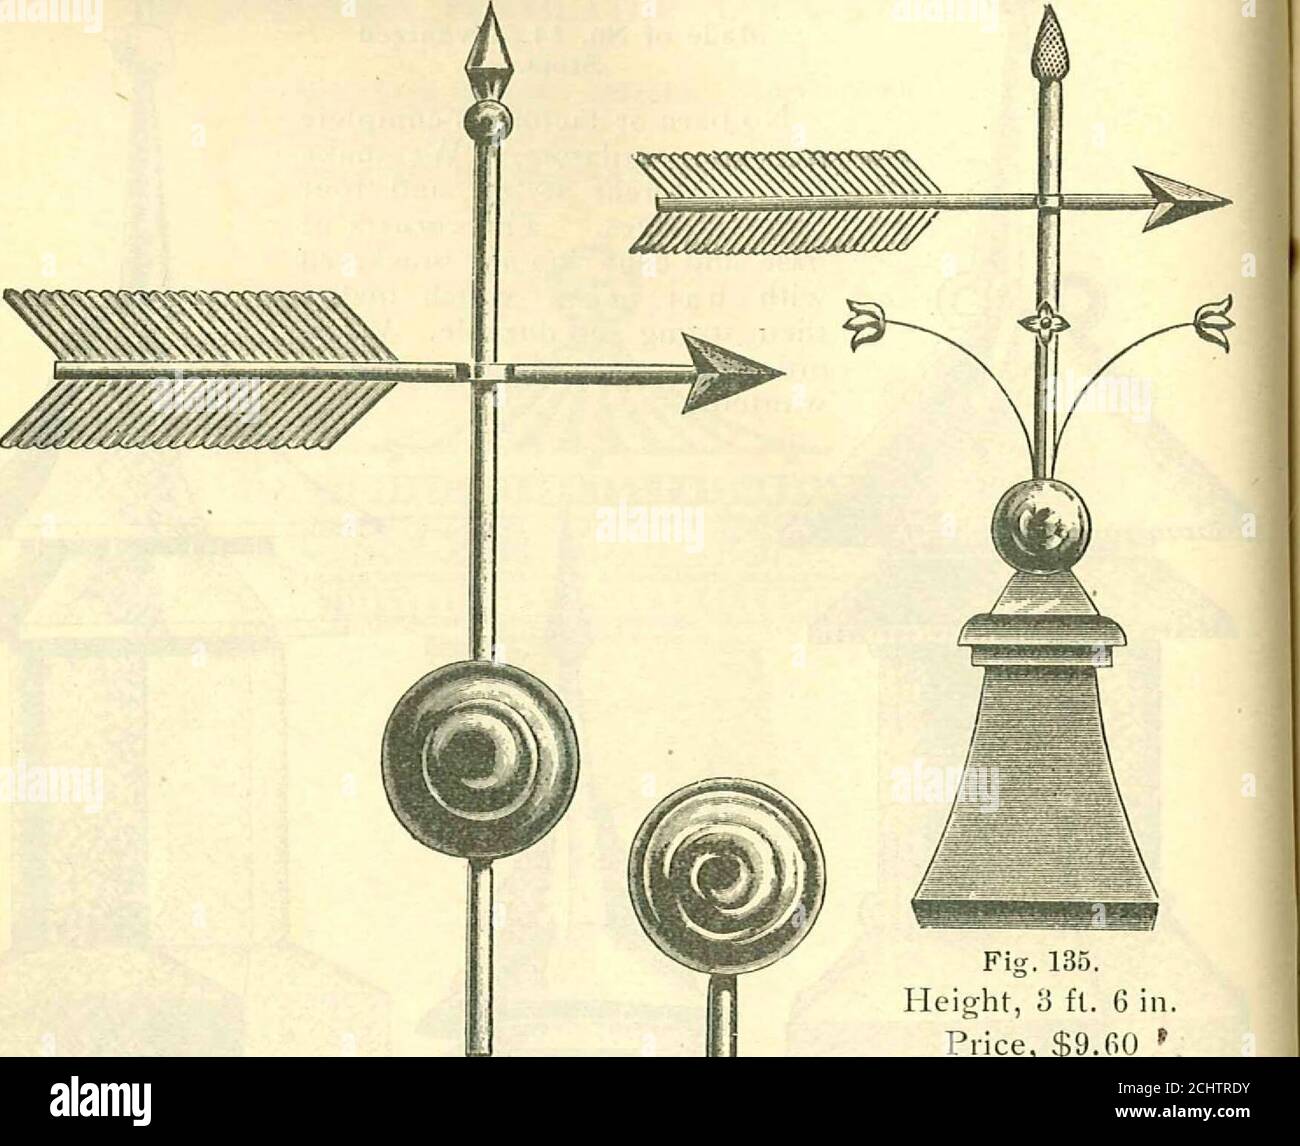 Roofing Catalog No. 9 . If 1 V □□ □ M □ /f; Fig. 172.si.e. PRICE LIST. No.  1—18-inch Base, 12-inch Drum, 5 feet high $12.75 No. 2—22-inch Base,  15-inch Drum,